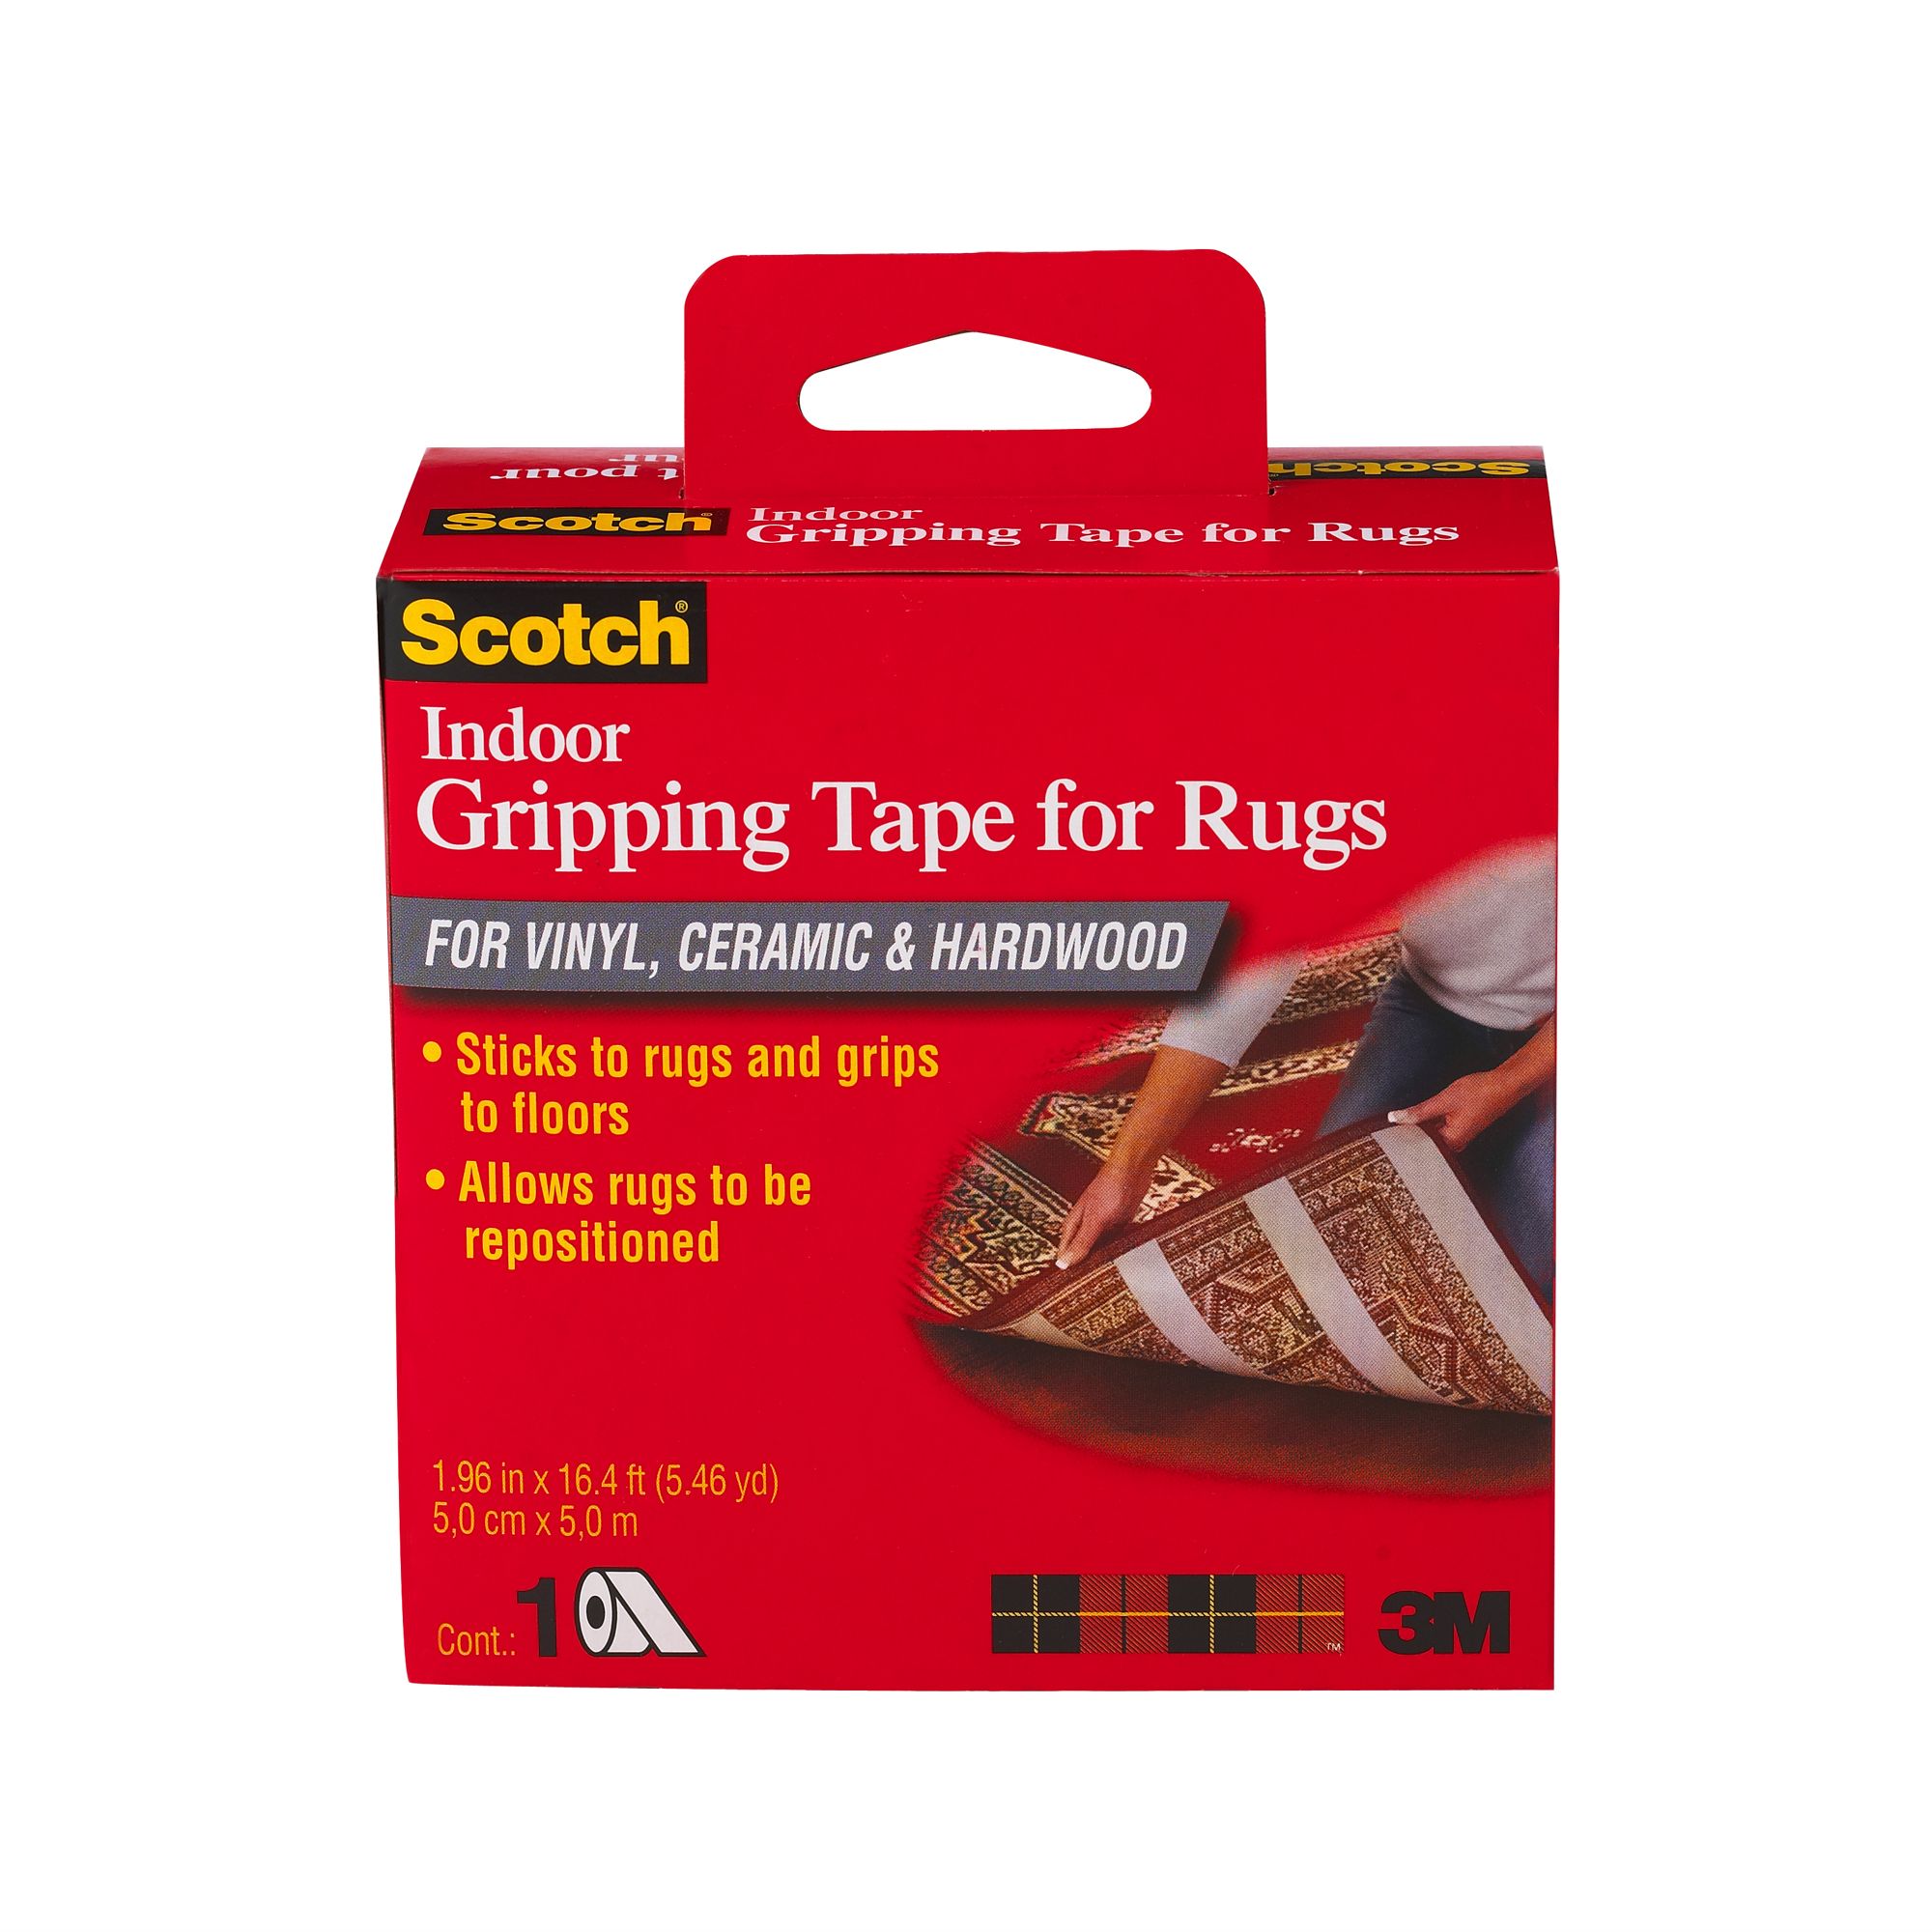 Scotch Indoor Gripping Tape for Rugs - 1.96 in. x 16.4 ft.